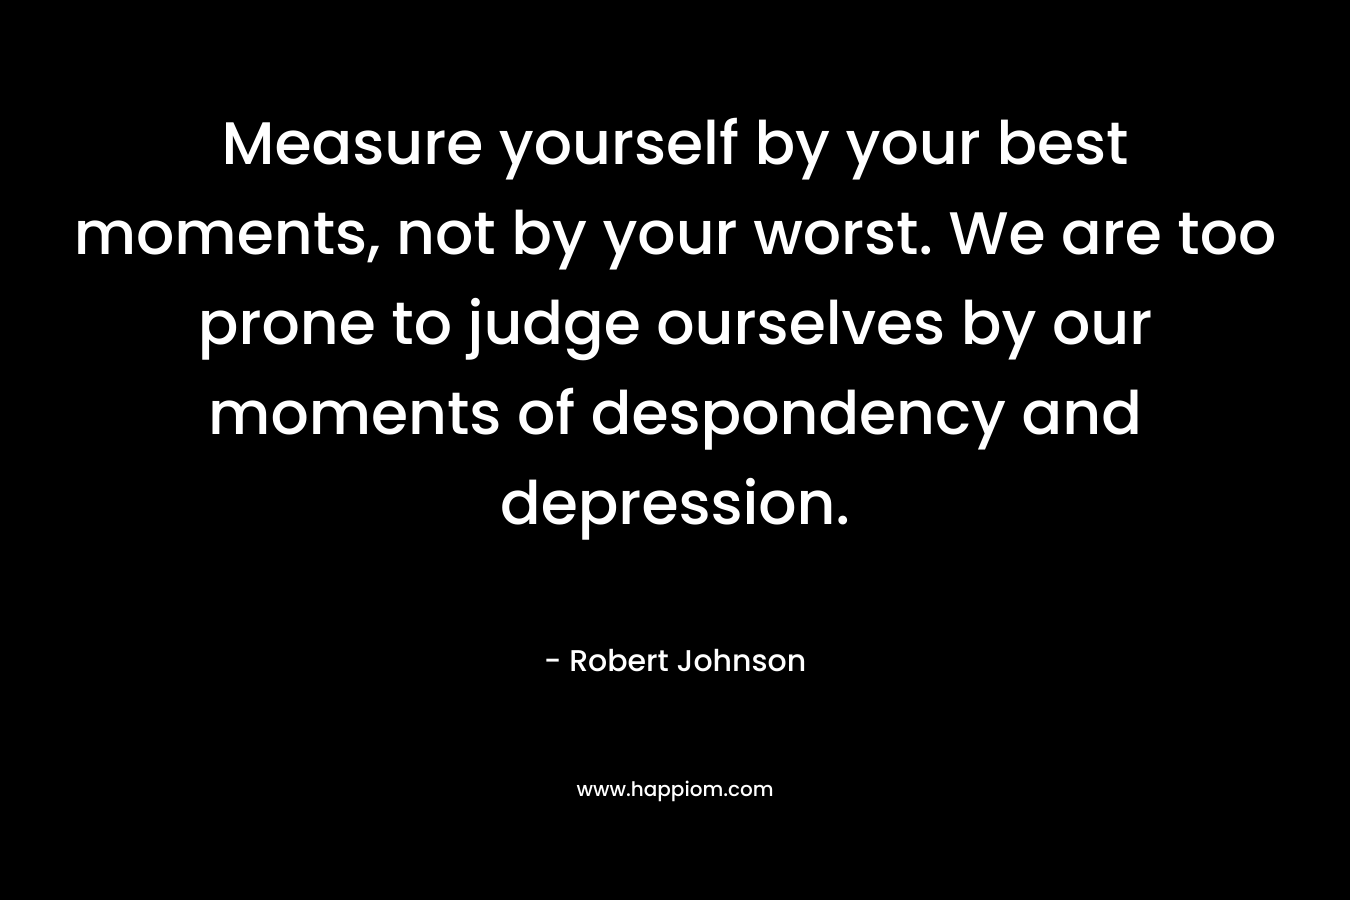 Measure yourself by your best moments, not by your worst. We are too prone to judge ourselves by our moments of despondency and depression.